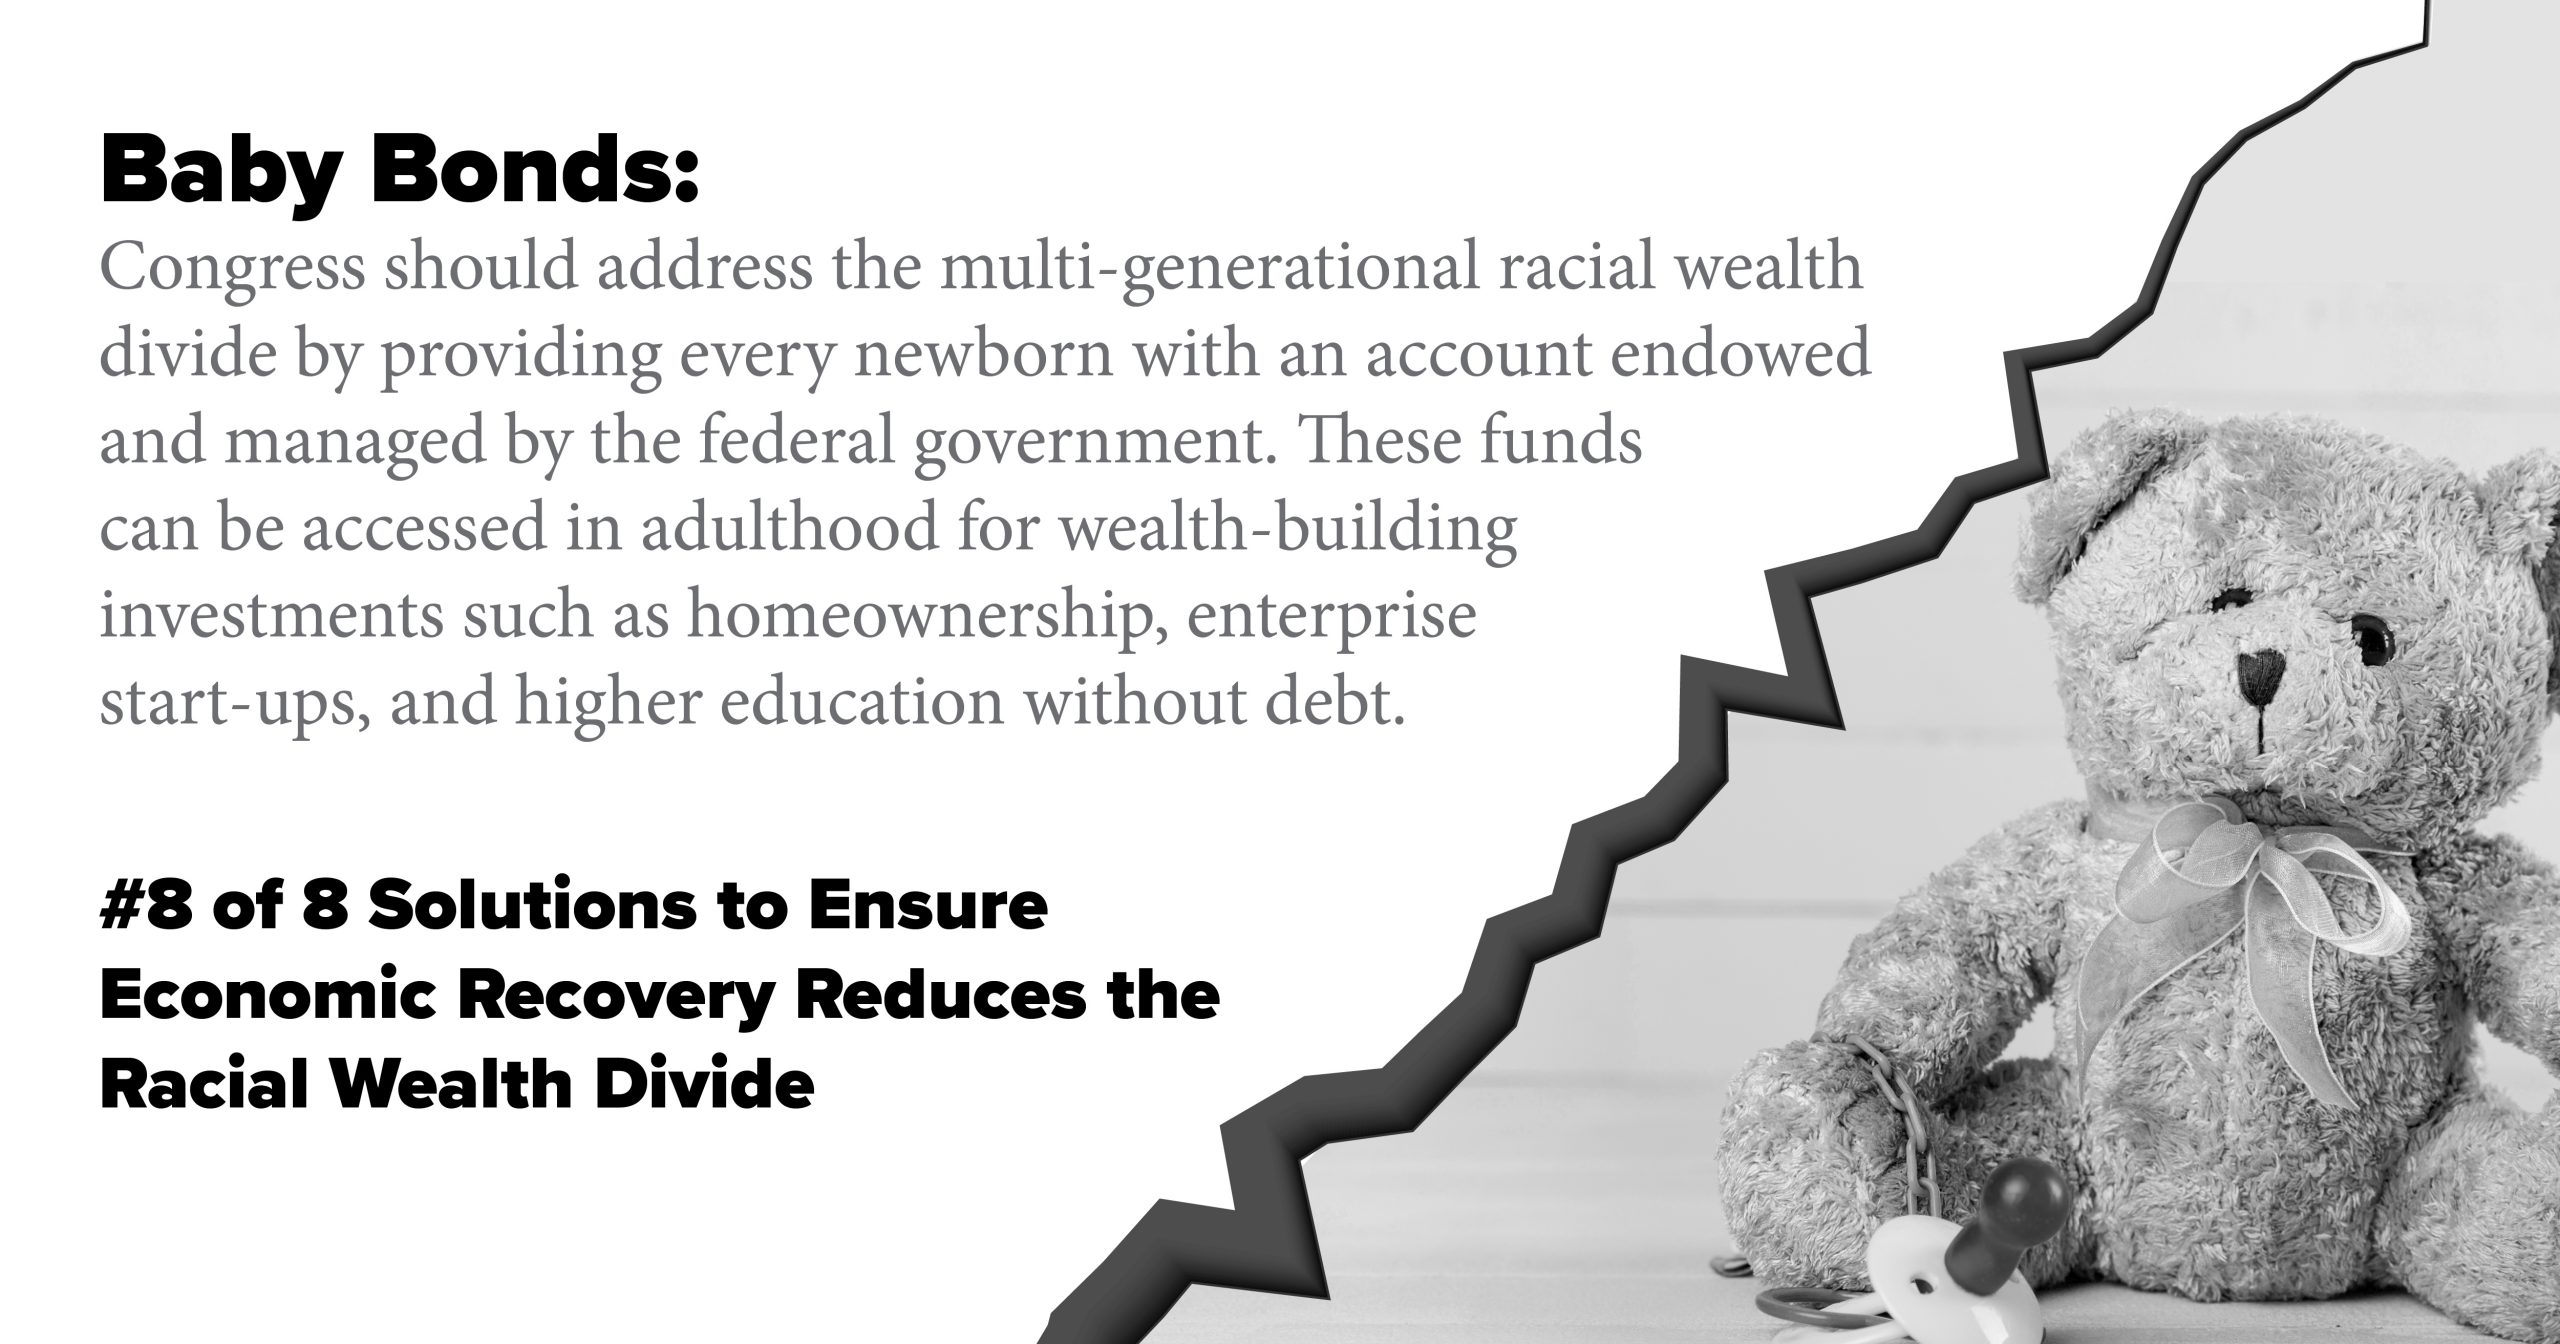 Baby Bonds. Congress should address the multi-generational racial wealth divide by providing every newborn with an account endowed and managed by the federal government. These funds can be accessed in adulthood for wealth-building investments such as homeownership, enterprise start-ups, and higher education without debt.